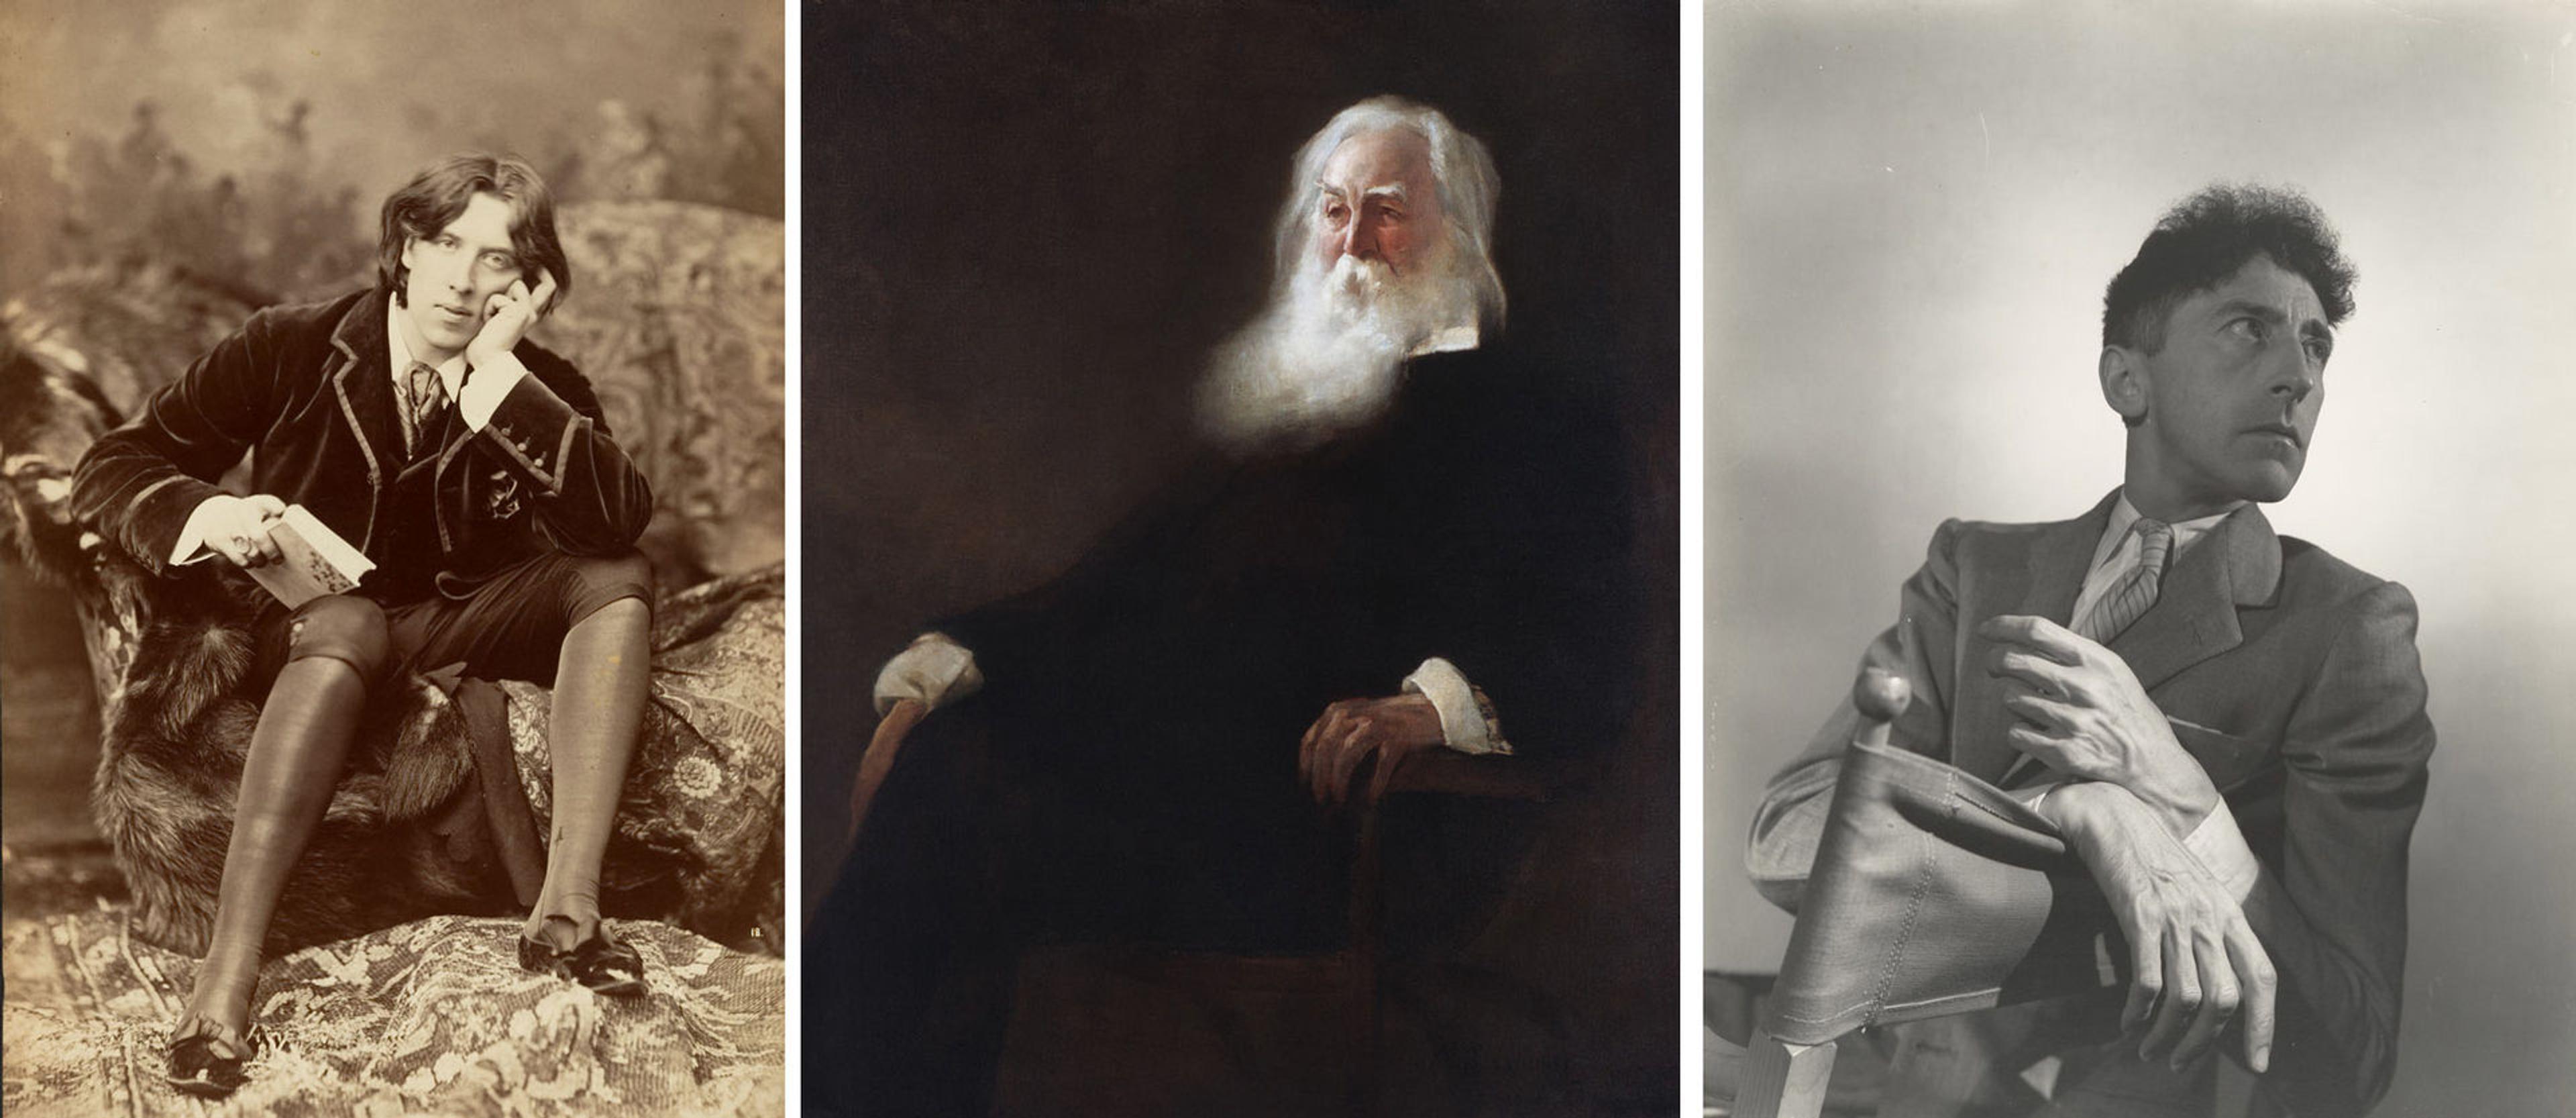 Portraits of three queer writers: Oscar Wilde, Walt Whitman, and Jean Cocteau